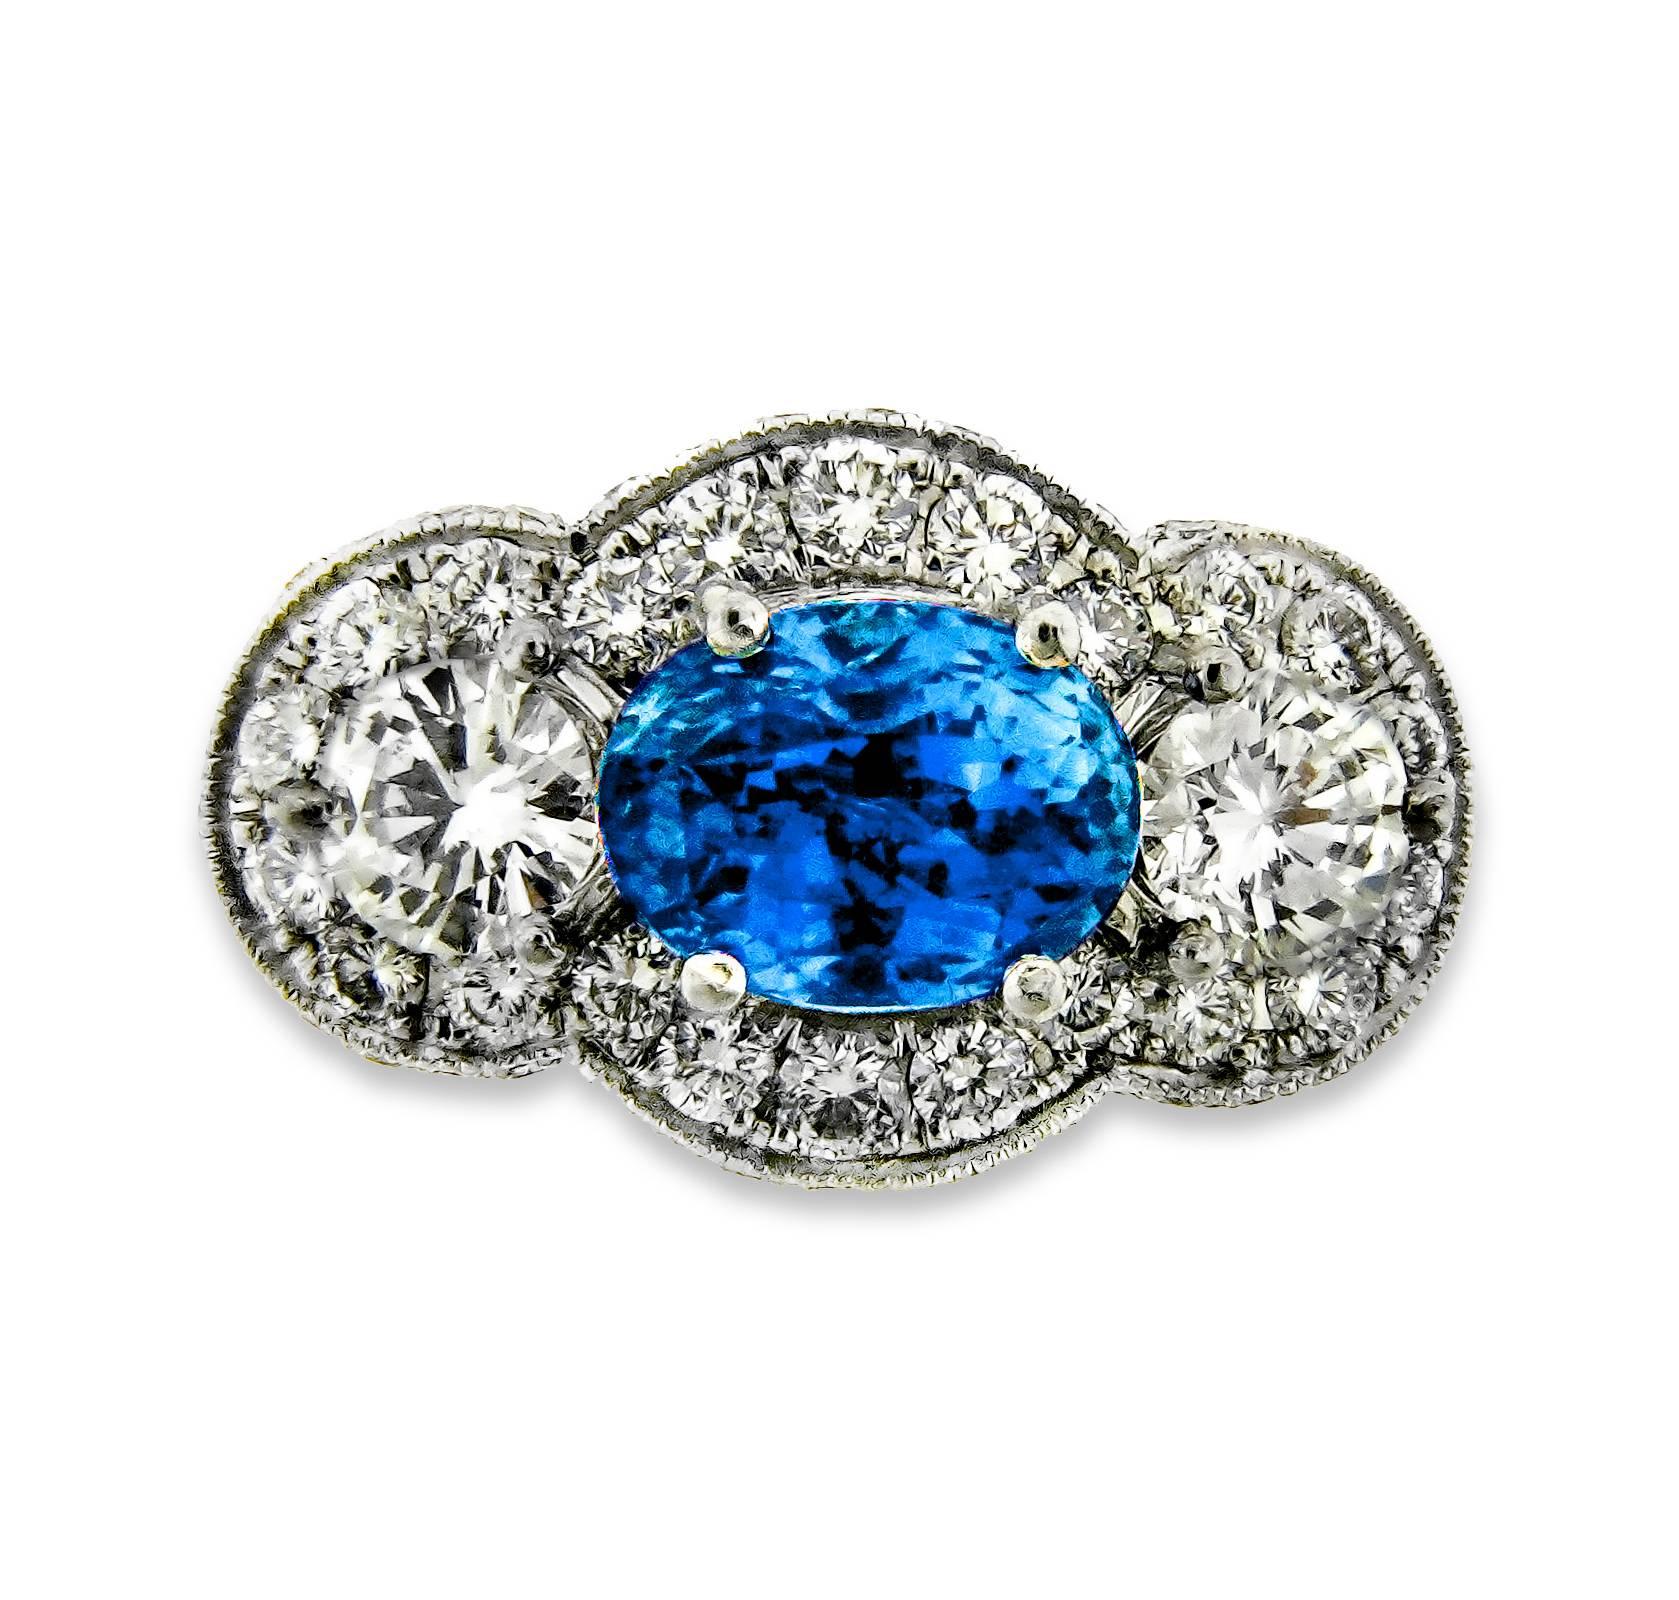 This dazzling platinum and striking non-heated Ceylon Sapphire (2.11 carat) cocktail/engagement ring designed by Danuta, will be sure to inspire compliments and appreciation. 

The radiant pair of 30 pt F/Vs1 side diamonds and shining 1ct total